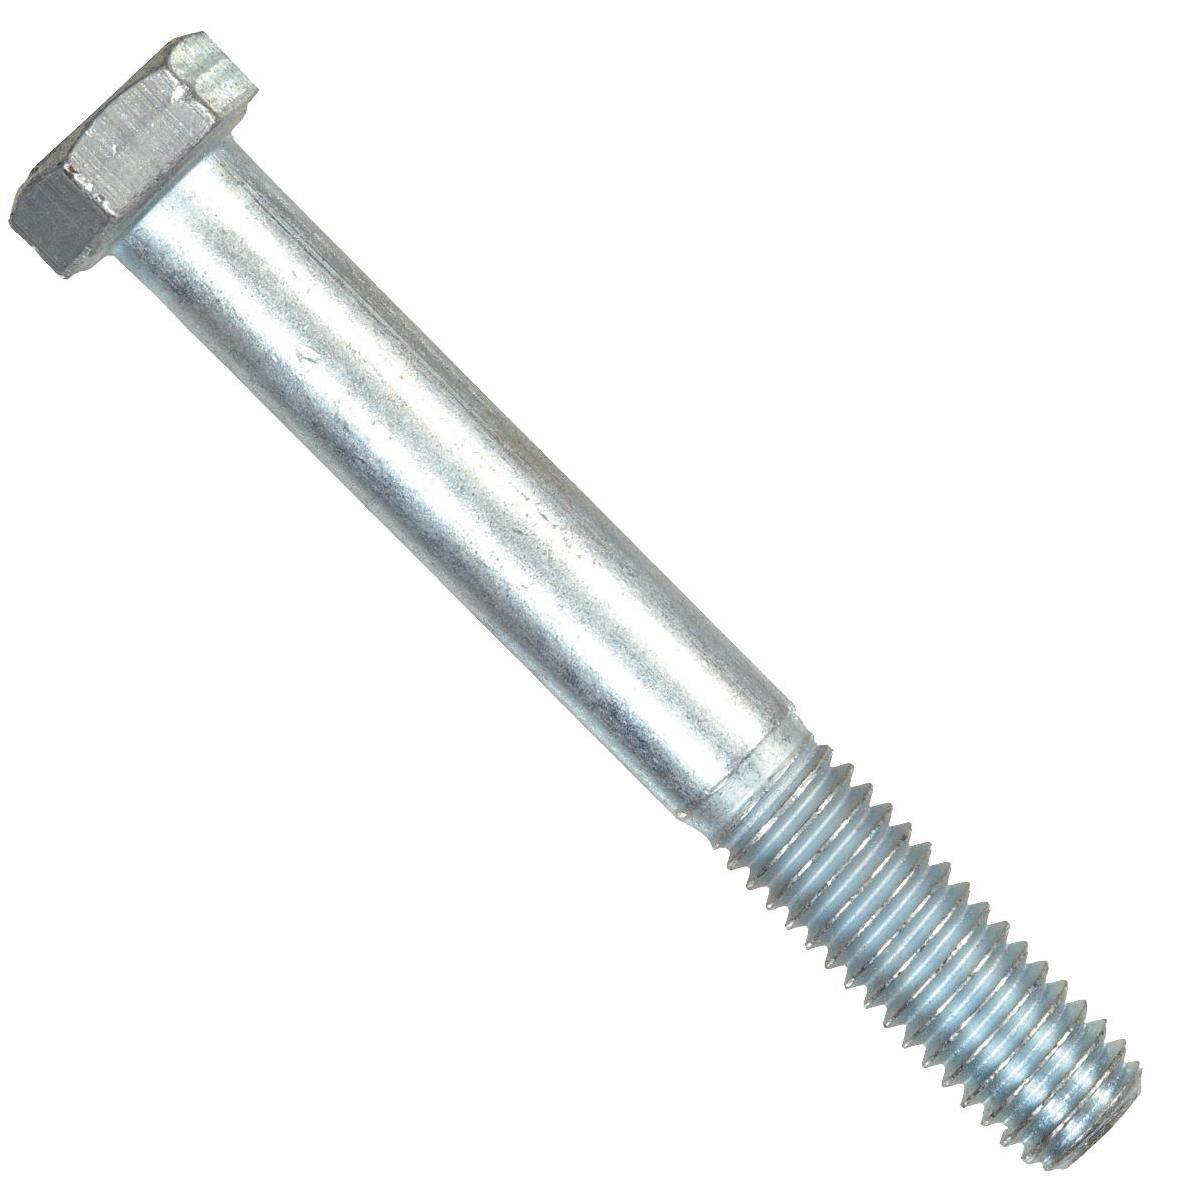 16 x 2" -25 CT -3/8" Stainless Steel Hex Head Cap Screw Bolts 